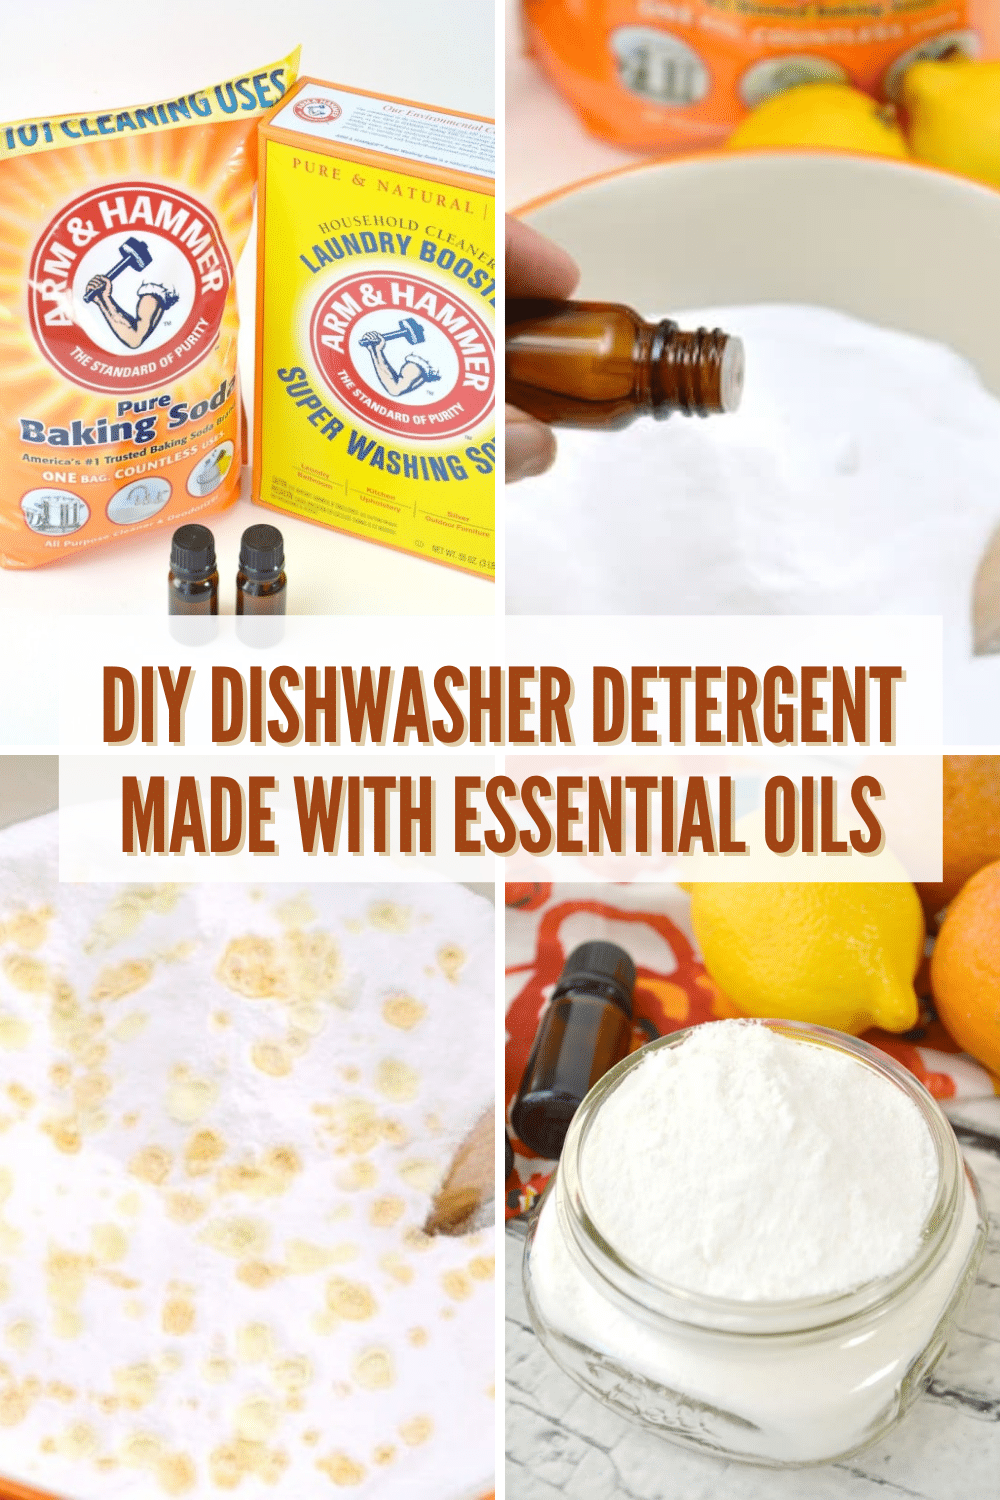 This DIY Dishwasher Detergent recipe is only 4 ingredients and super fast to make. This is a cost effective way to make detergent using basic ingredients. #diy #essentialoils #housekeeping via @wondermomwannab